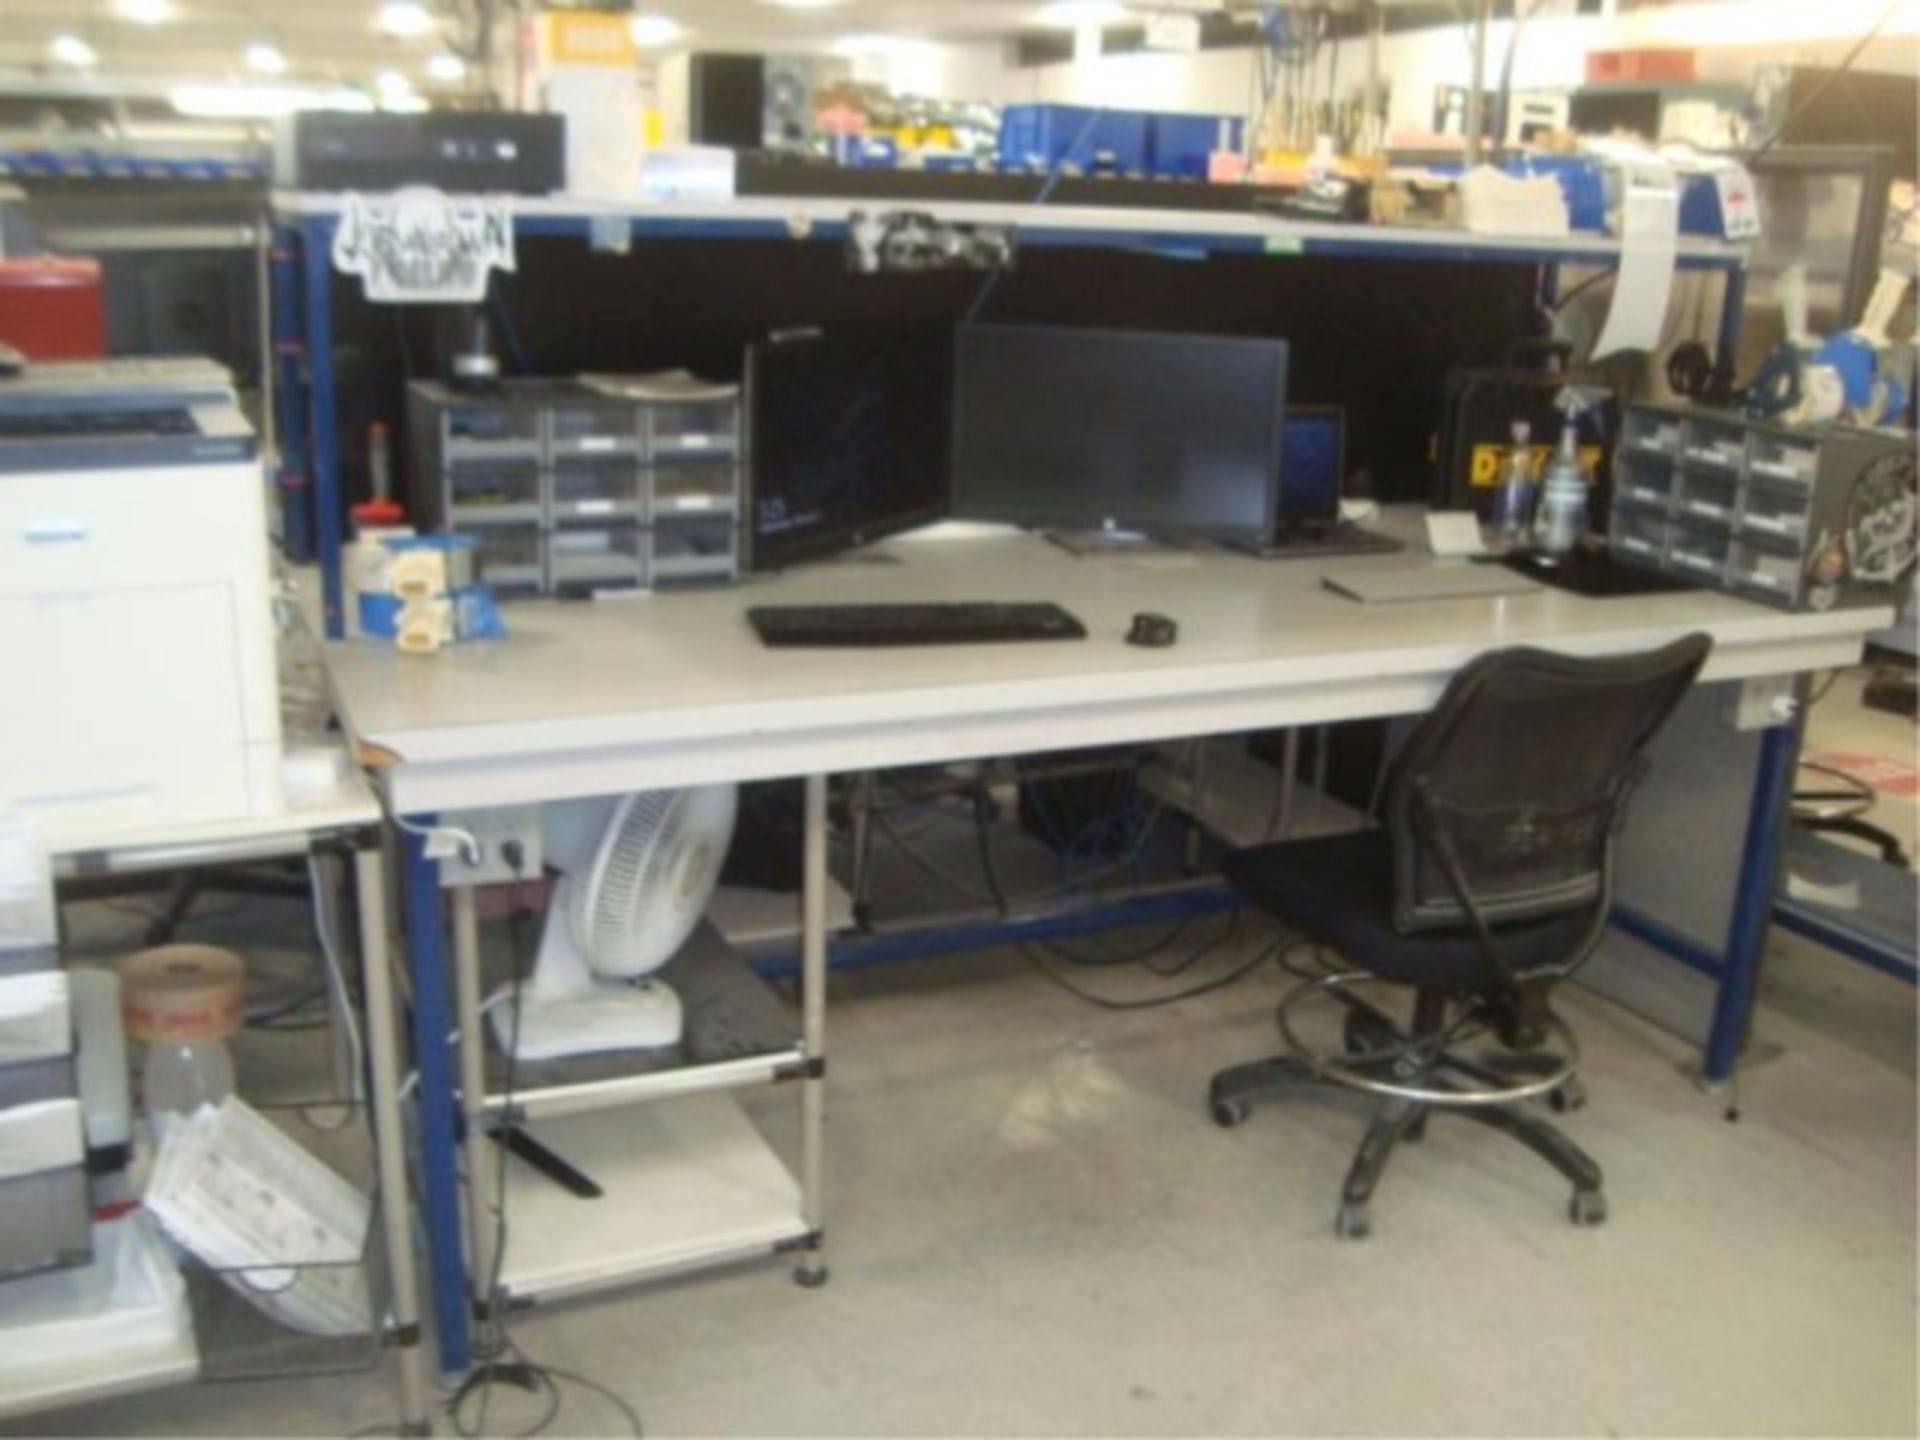 Heavy Duty Workstation Benches - Image 6 of 9